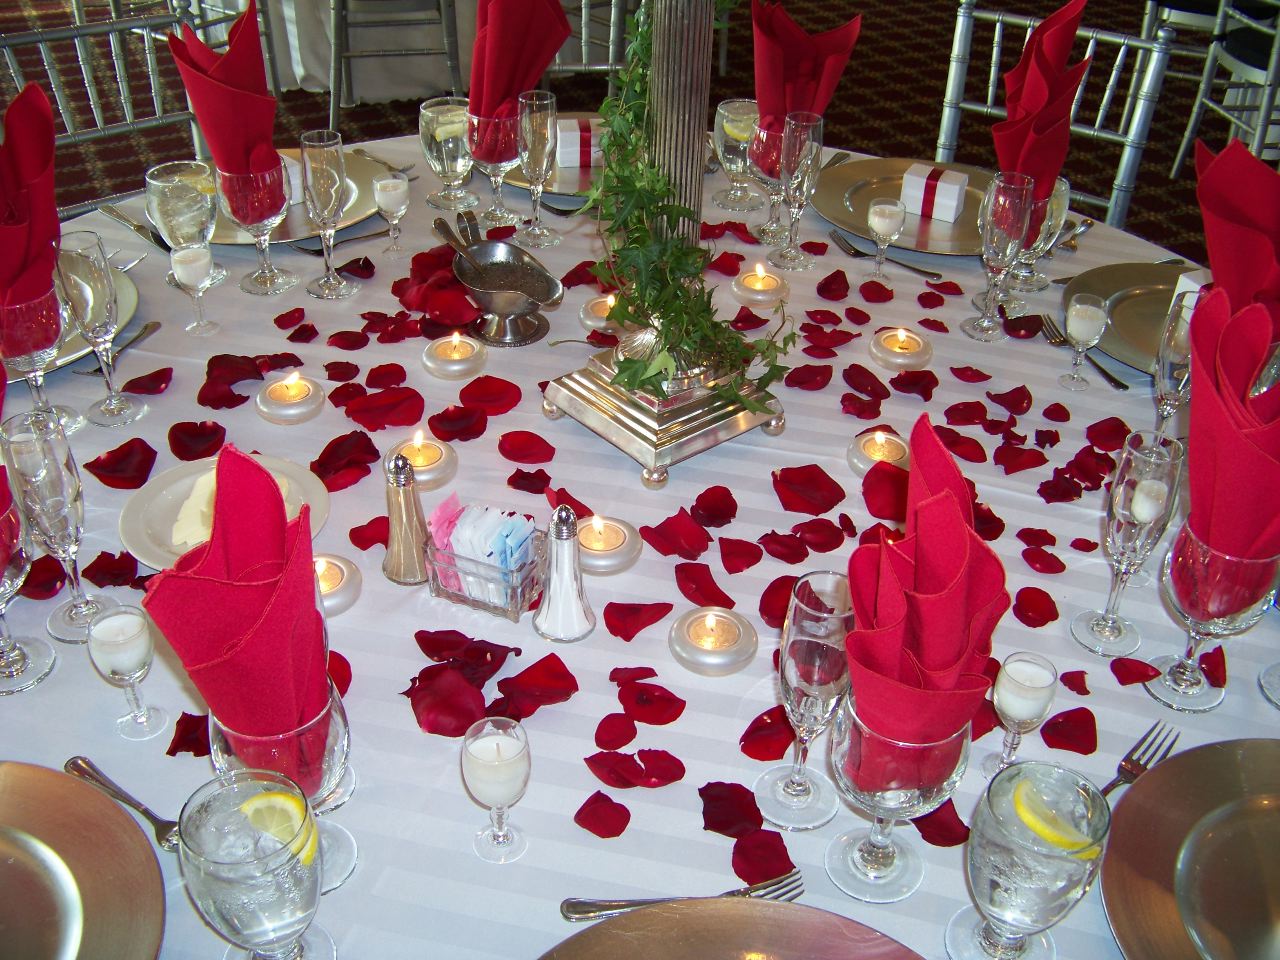 photos of simple wedding table decorations